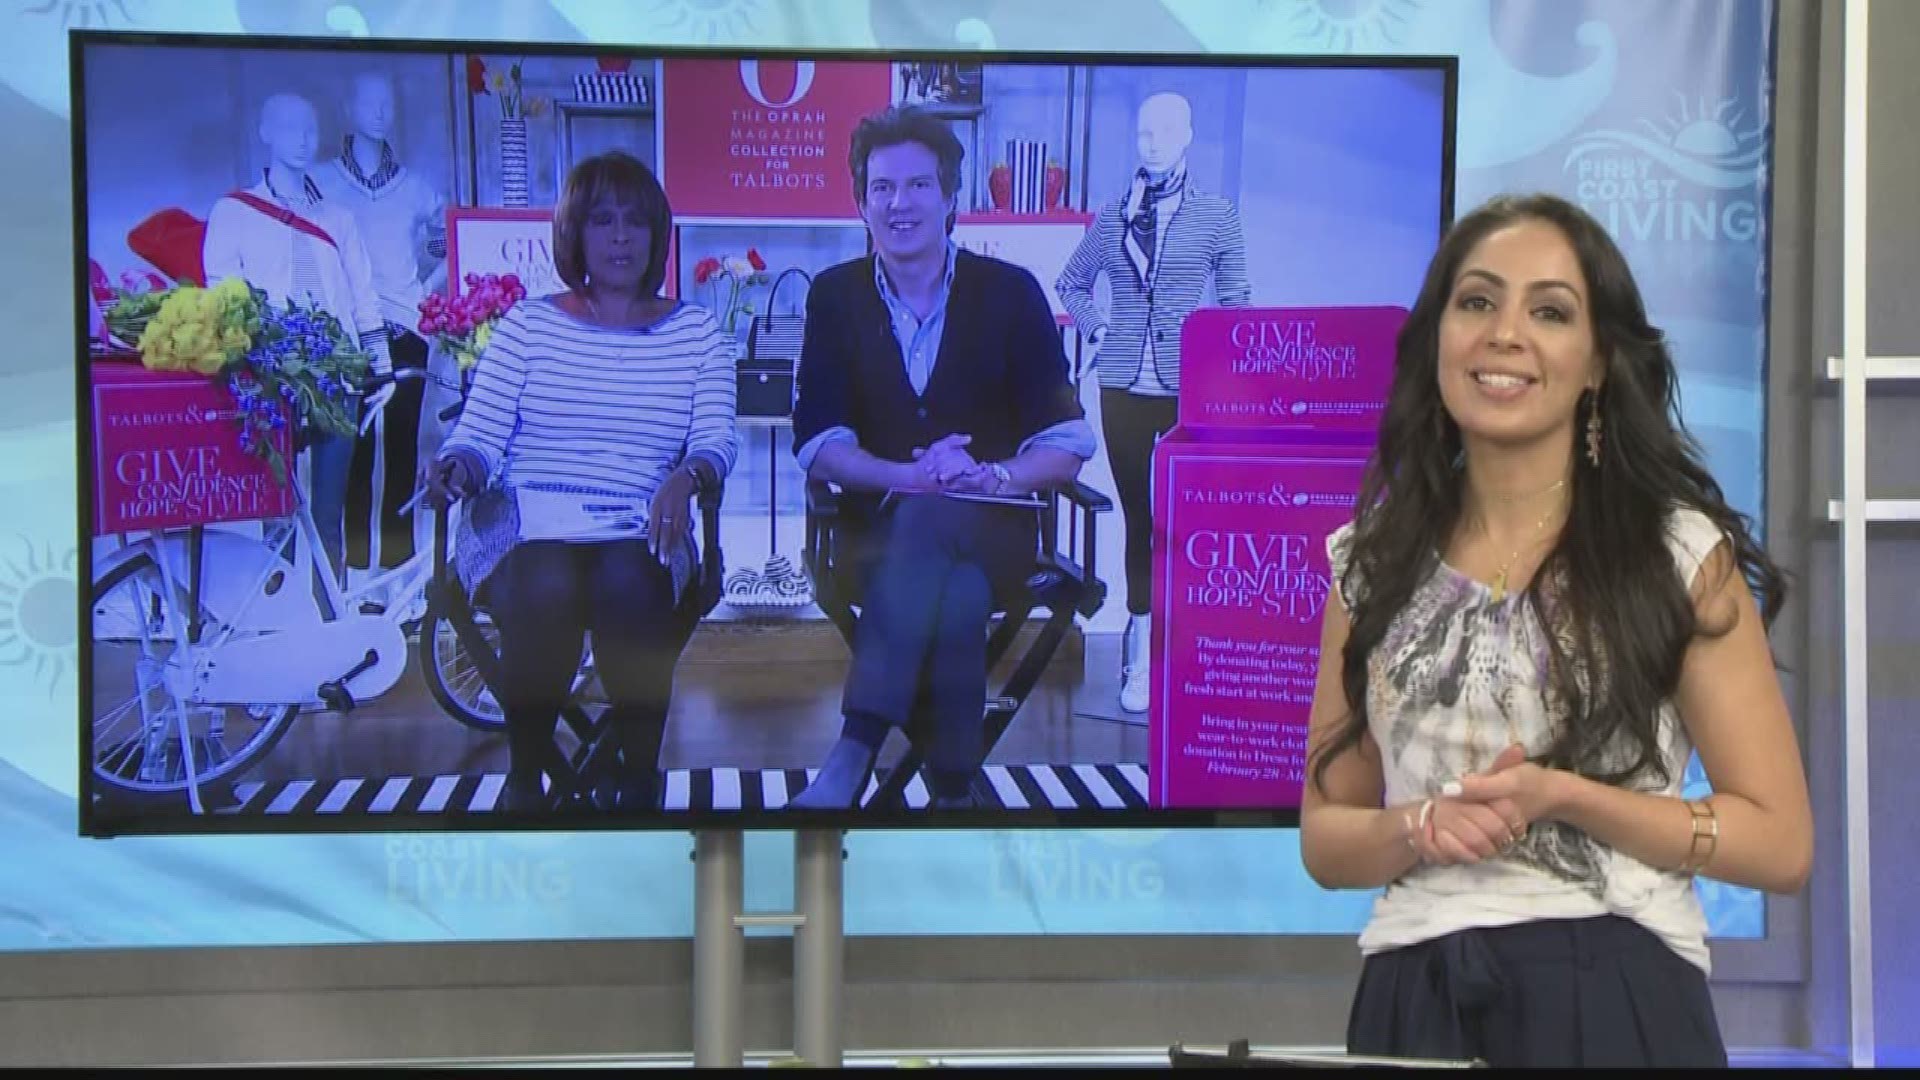 New Oprah magazine "O" and Talbots team up with an international organization to help women dress for success.